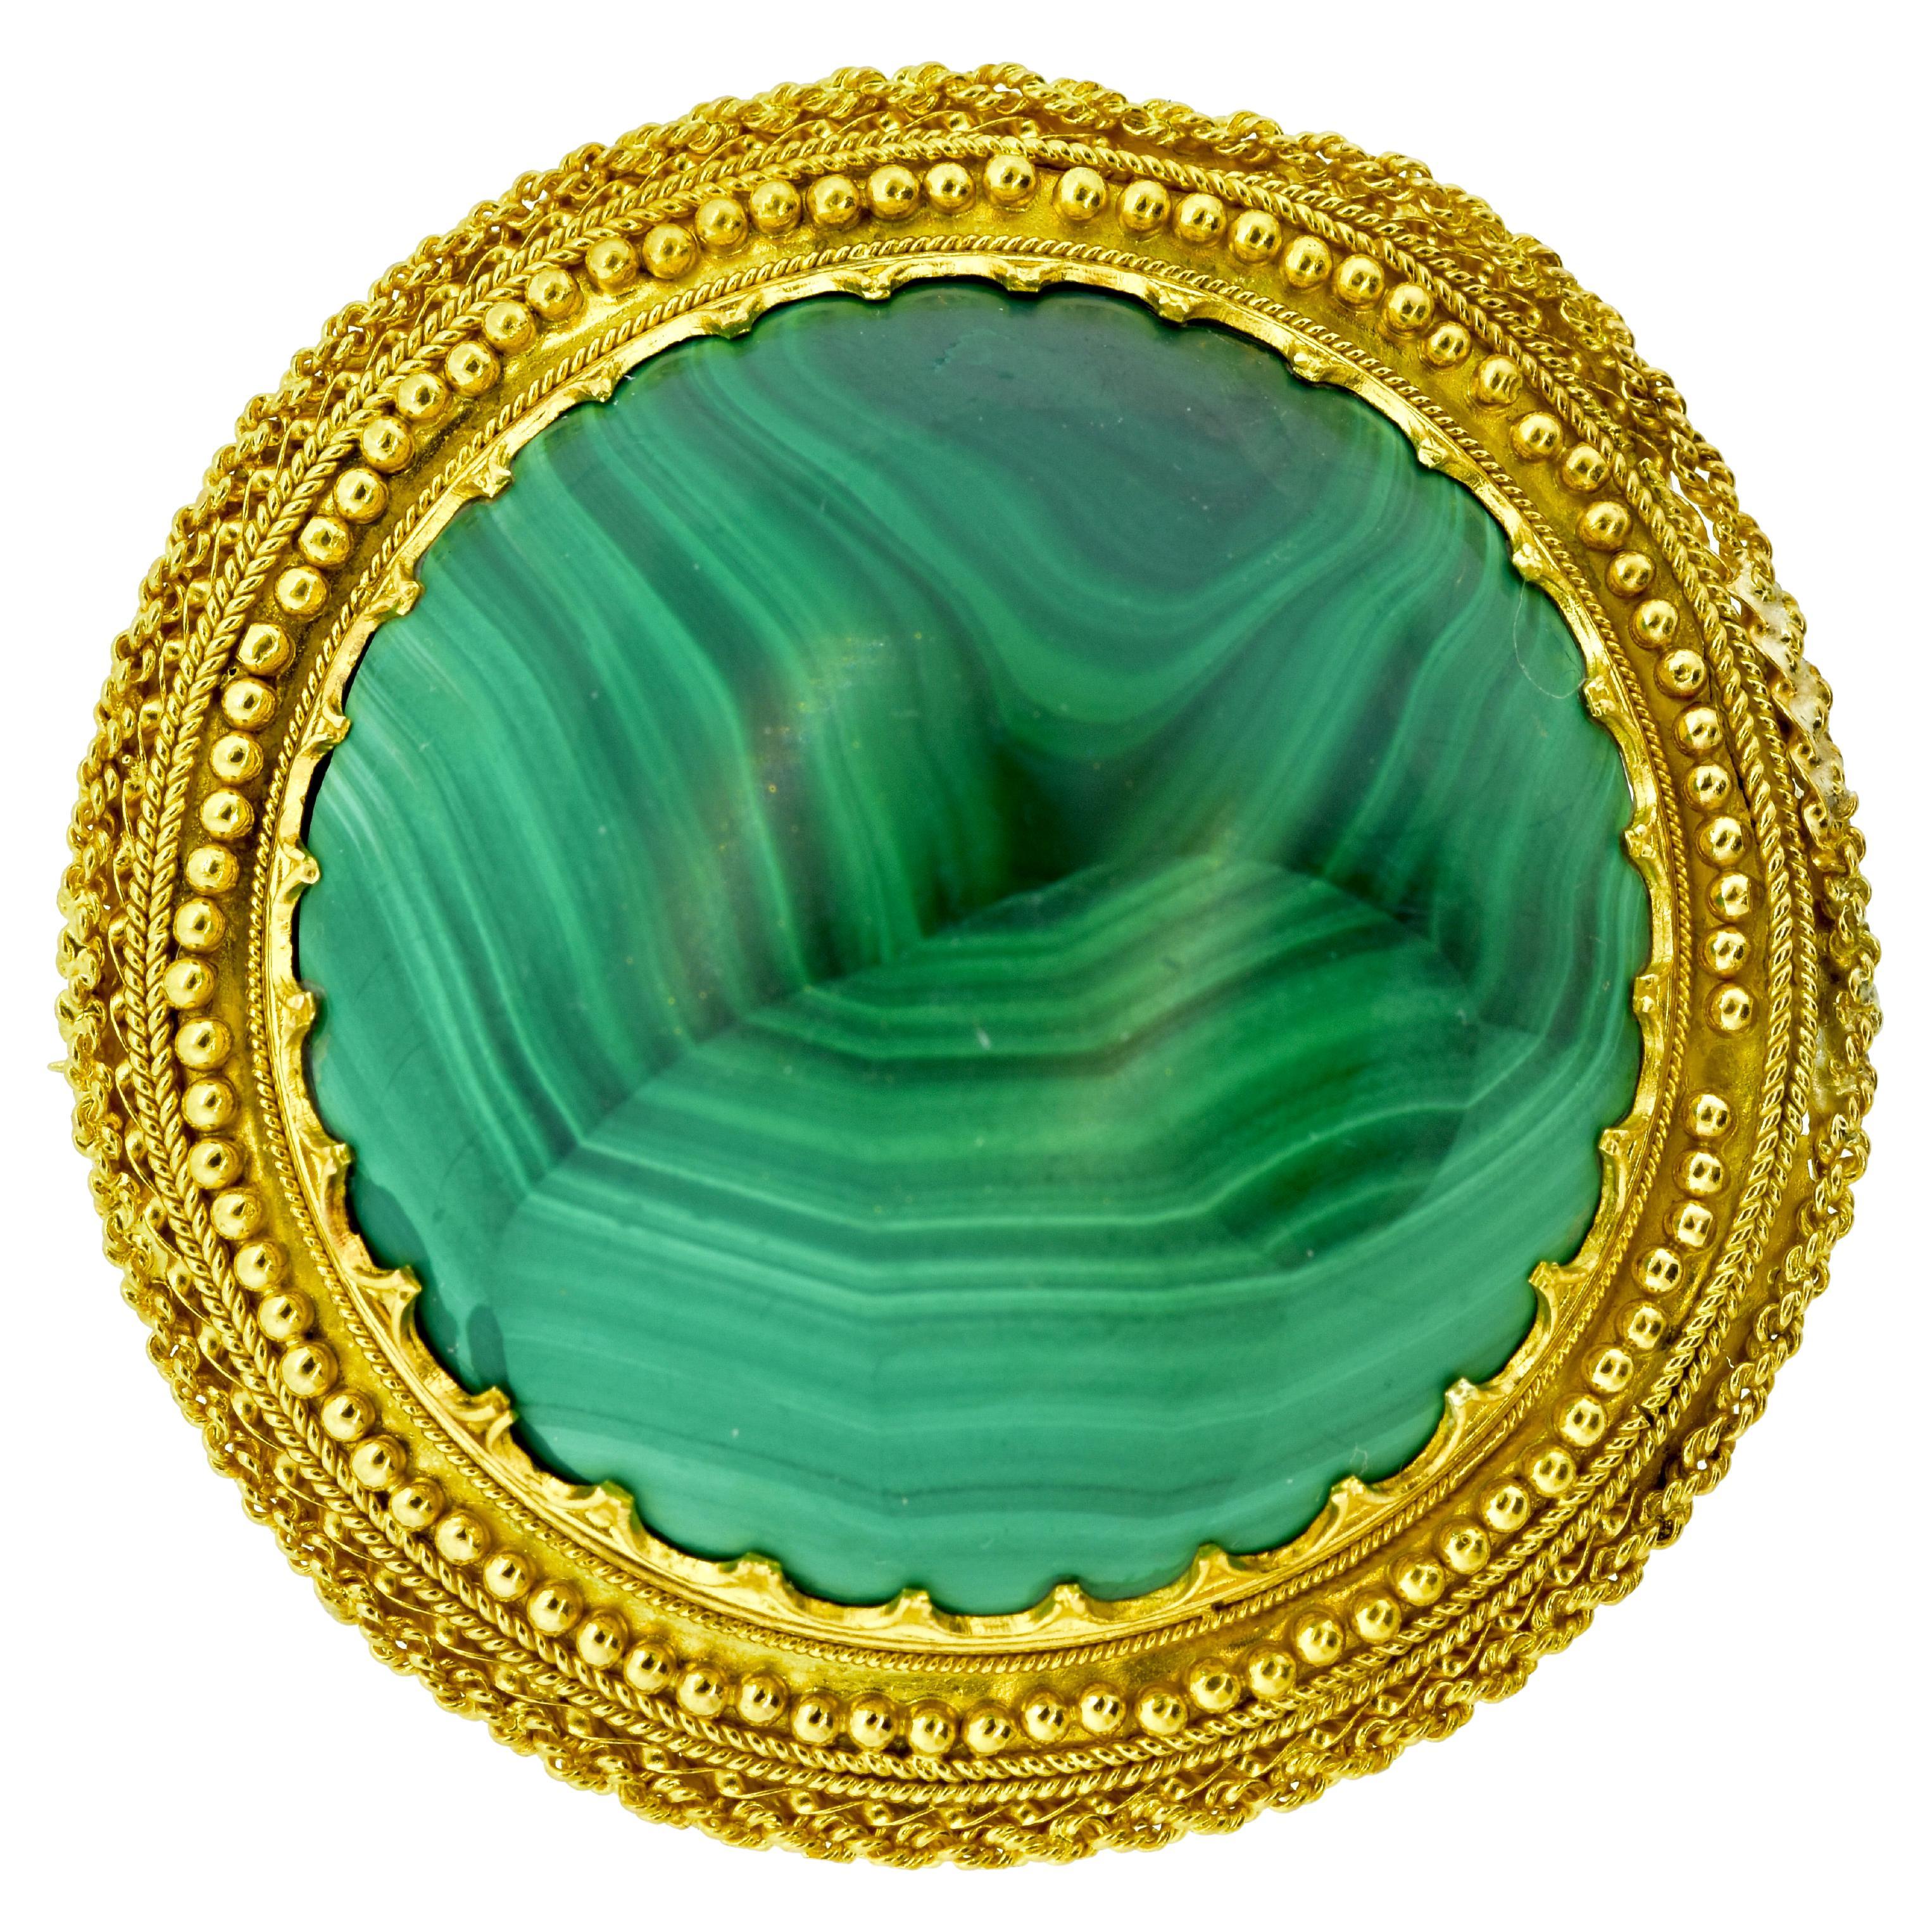 Antique 18K and Malachite Large Brooch, c. 1880